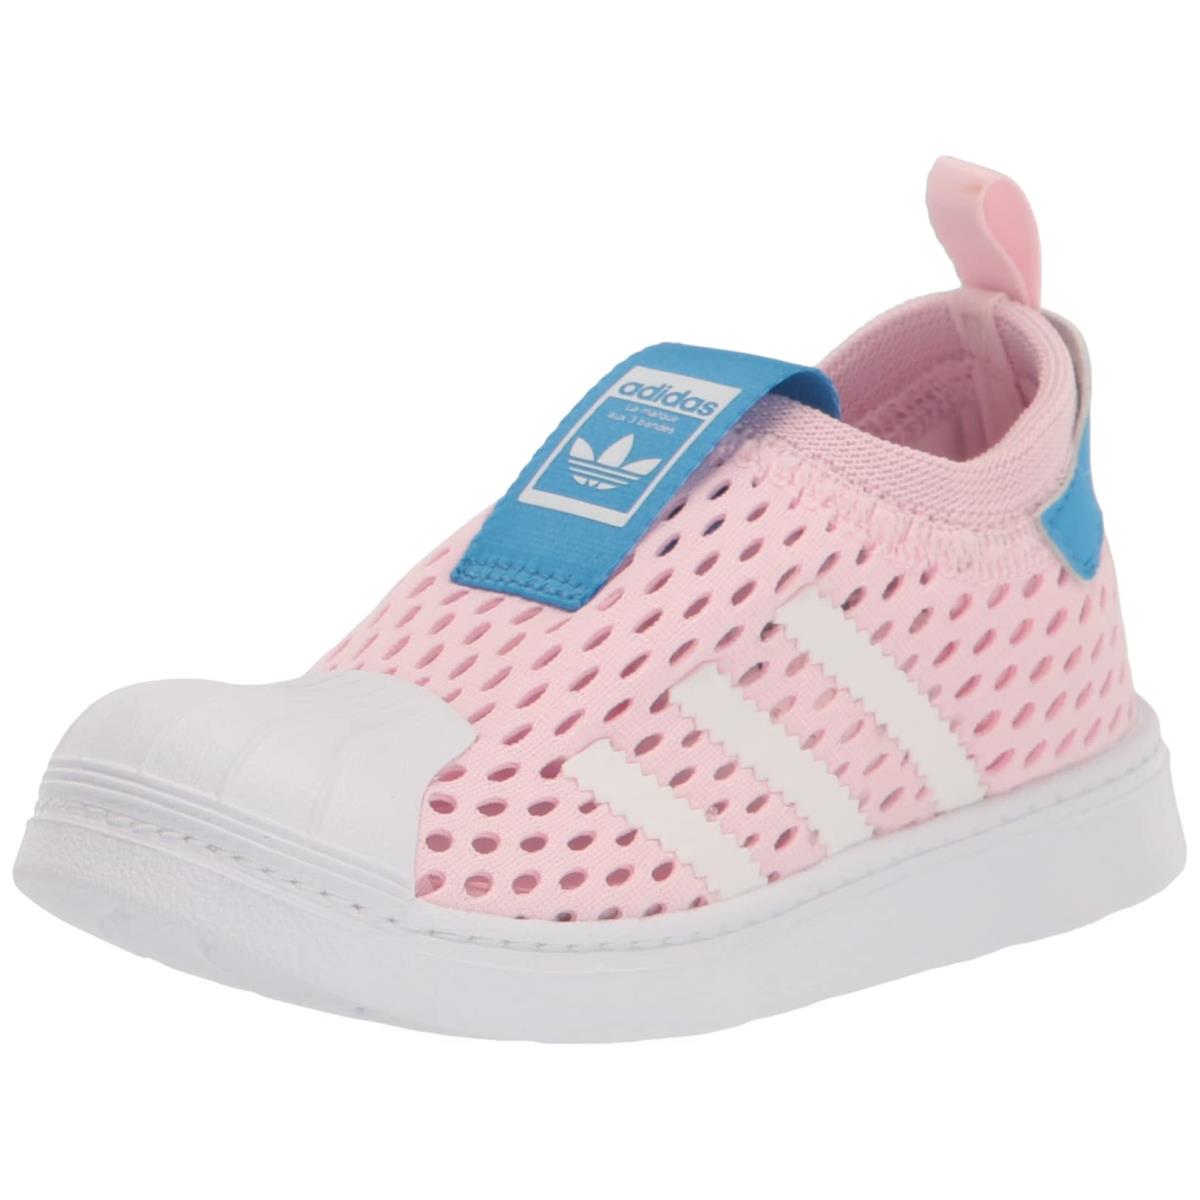 Adidas Originals Baby Girl`s Superstar 360 Toddle Clear Pink/White/Pulse Blue